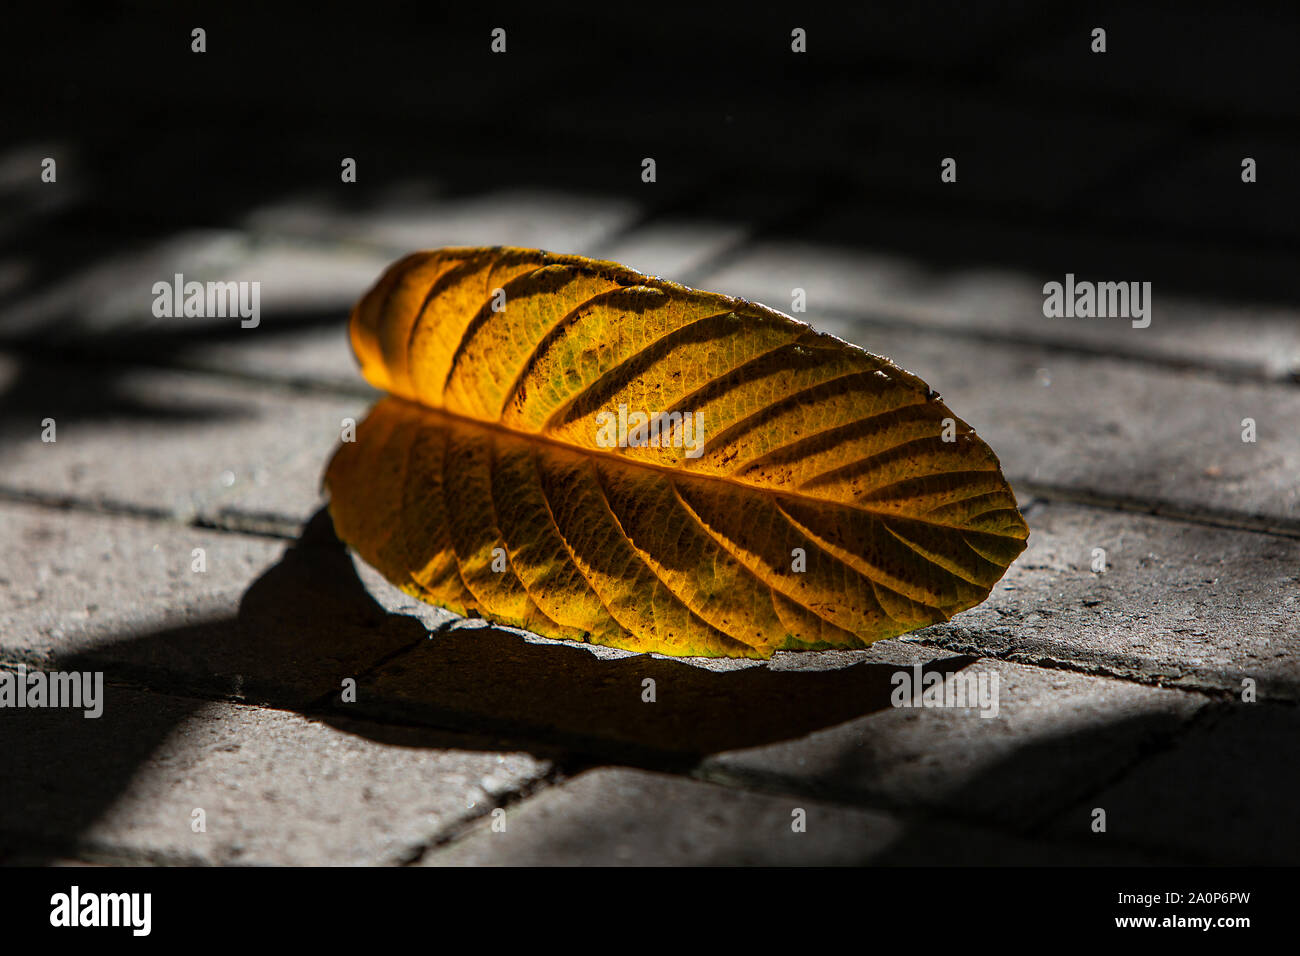 A leaf on a paved surface is backlit by the sun Stock Photo